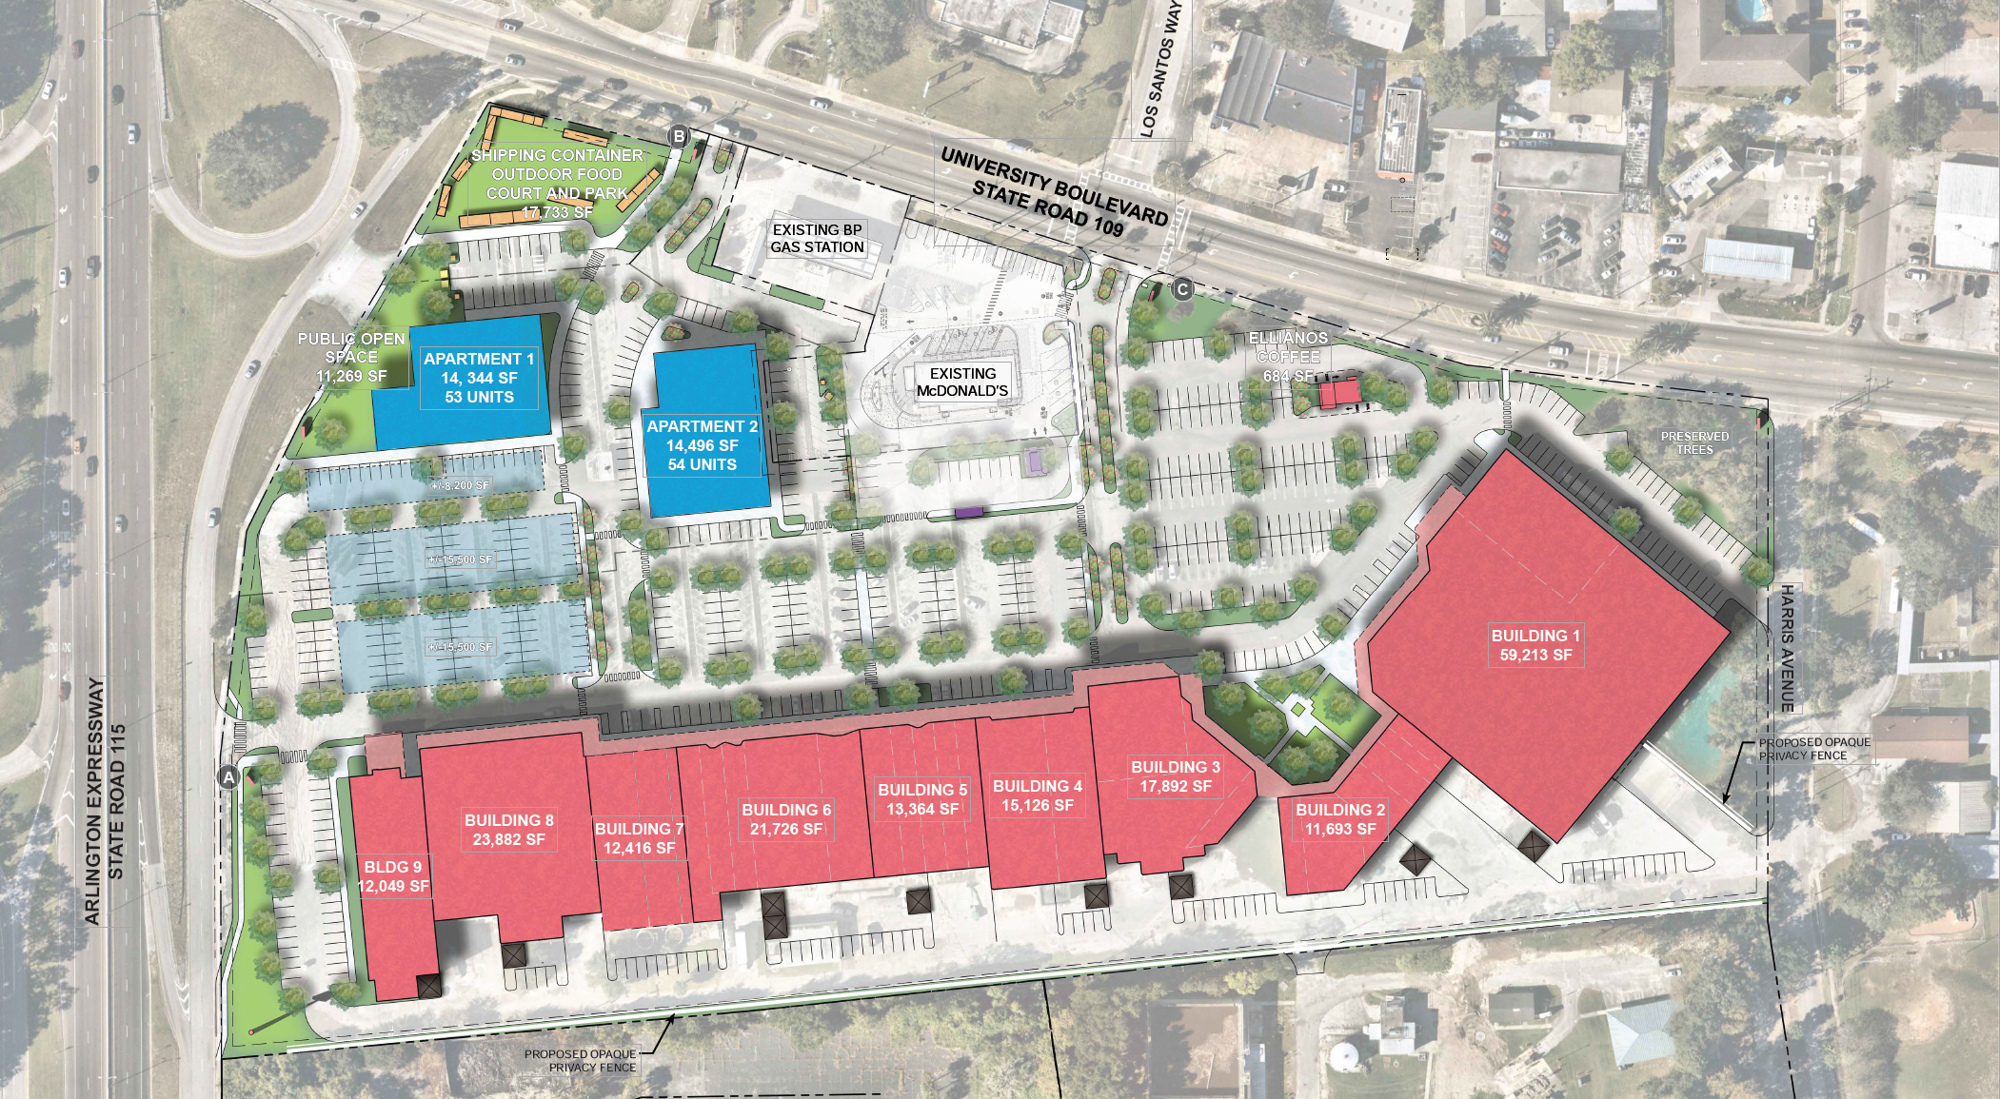 The site plan for College Park shows the existing shopping center buildings in red.